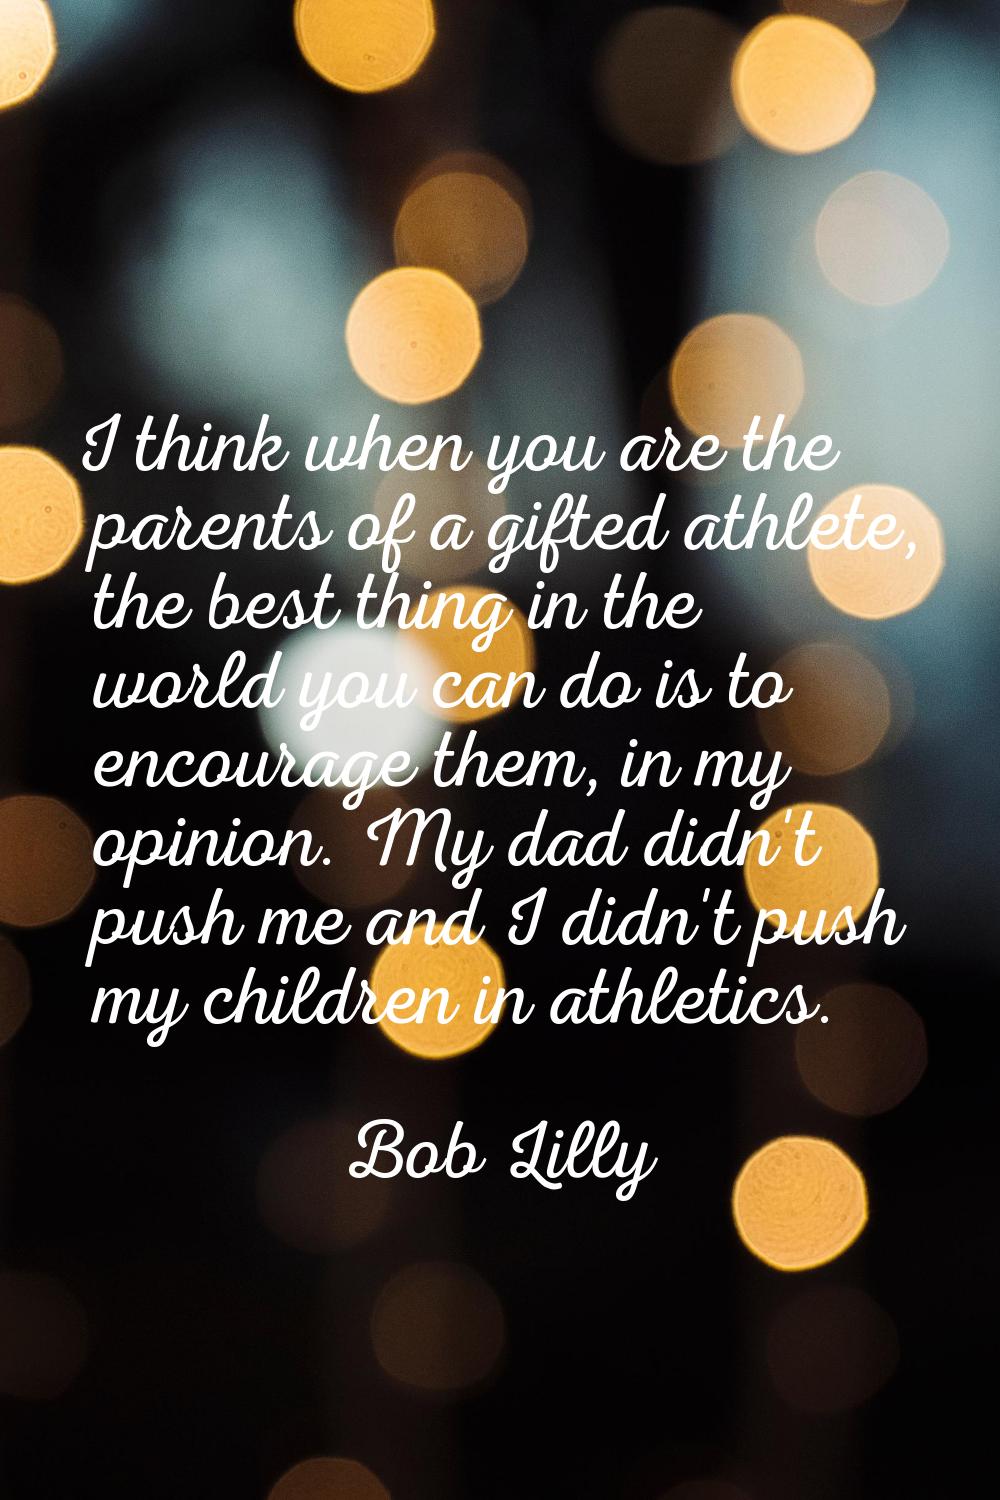 I think when you are the parents of a gifted athlete, the best thing in the world you can do is to 